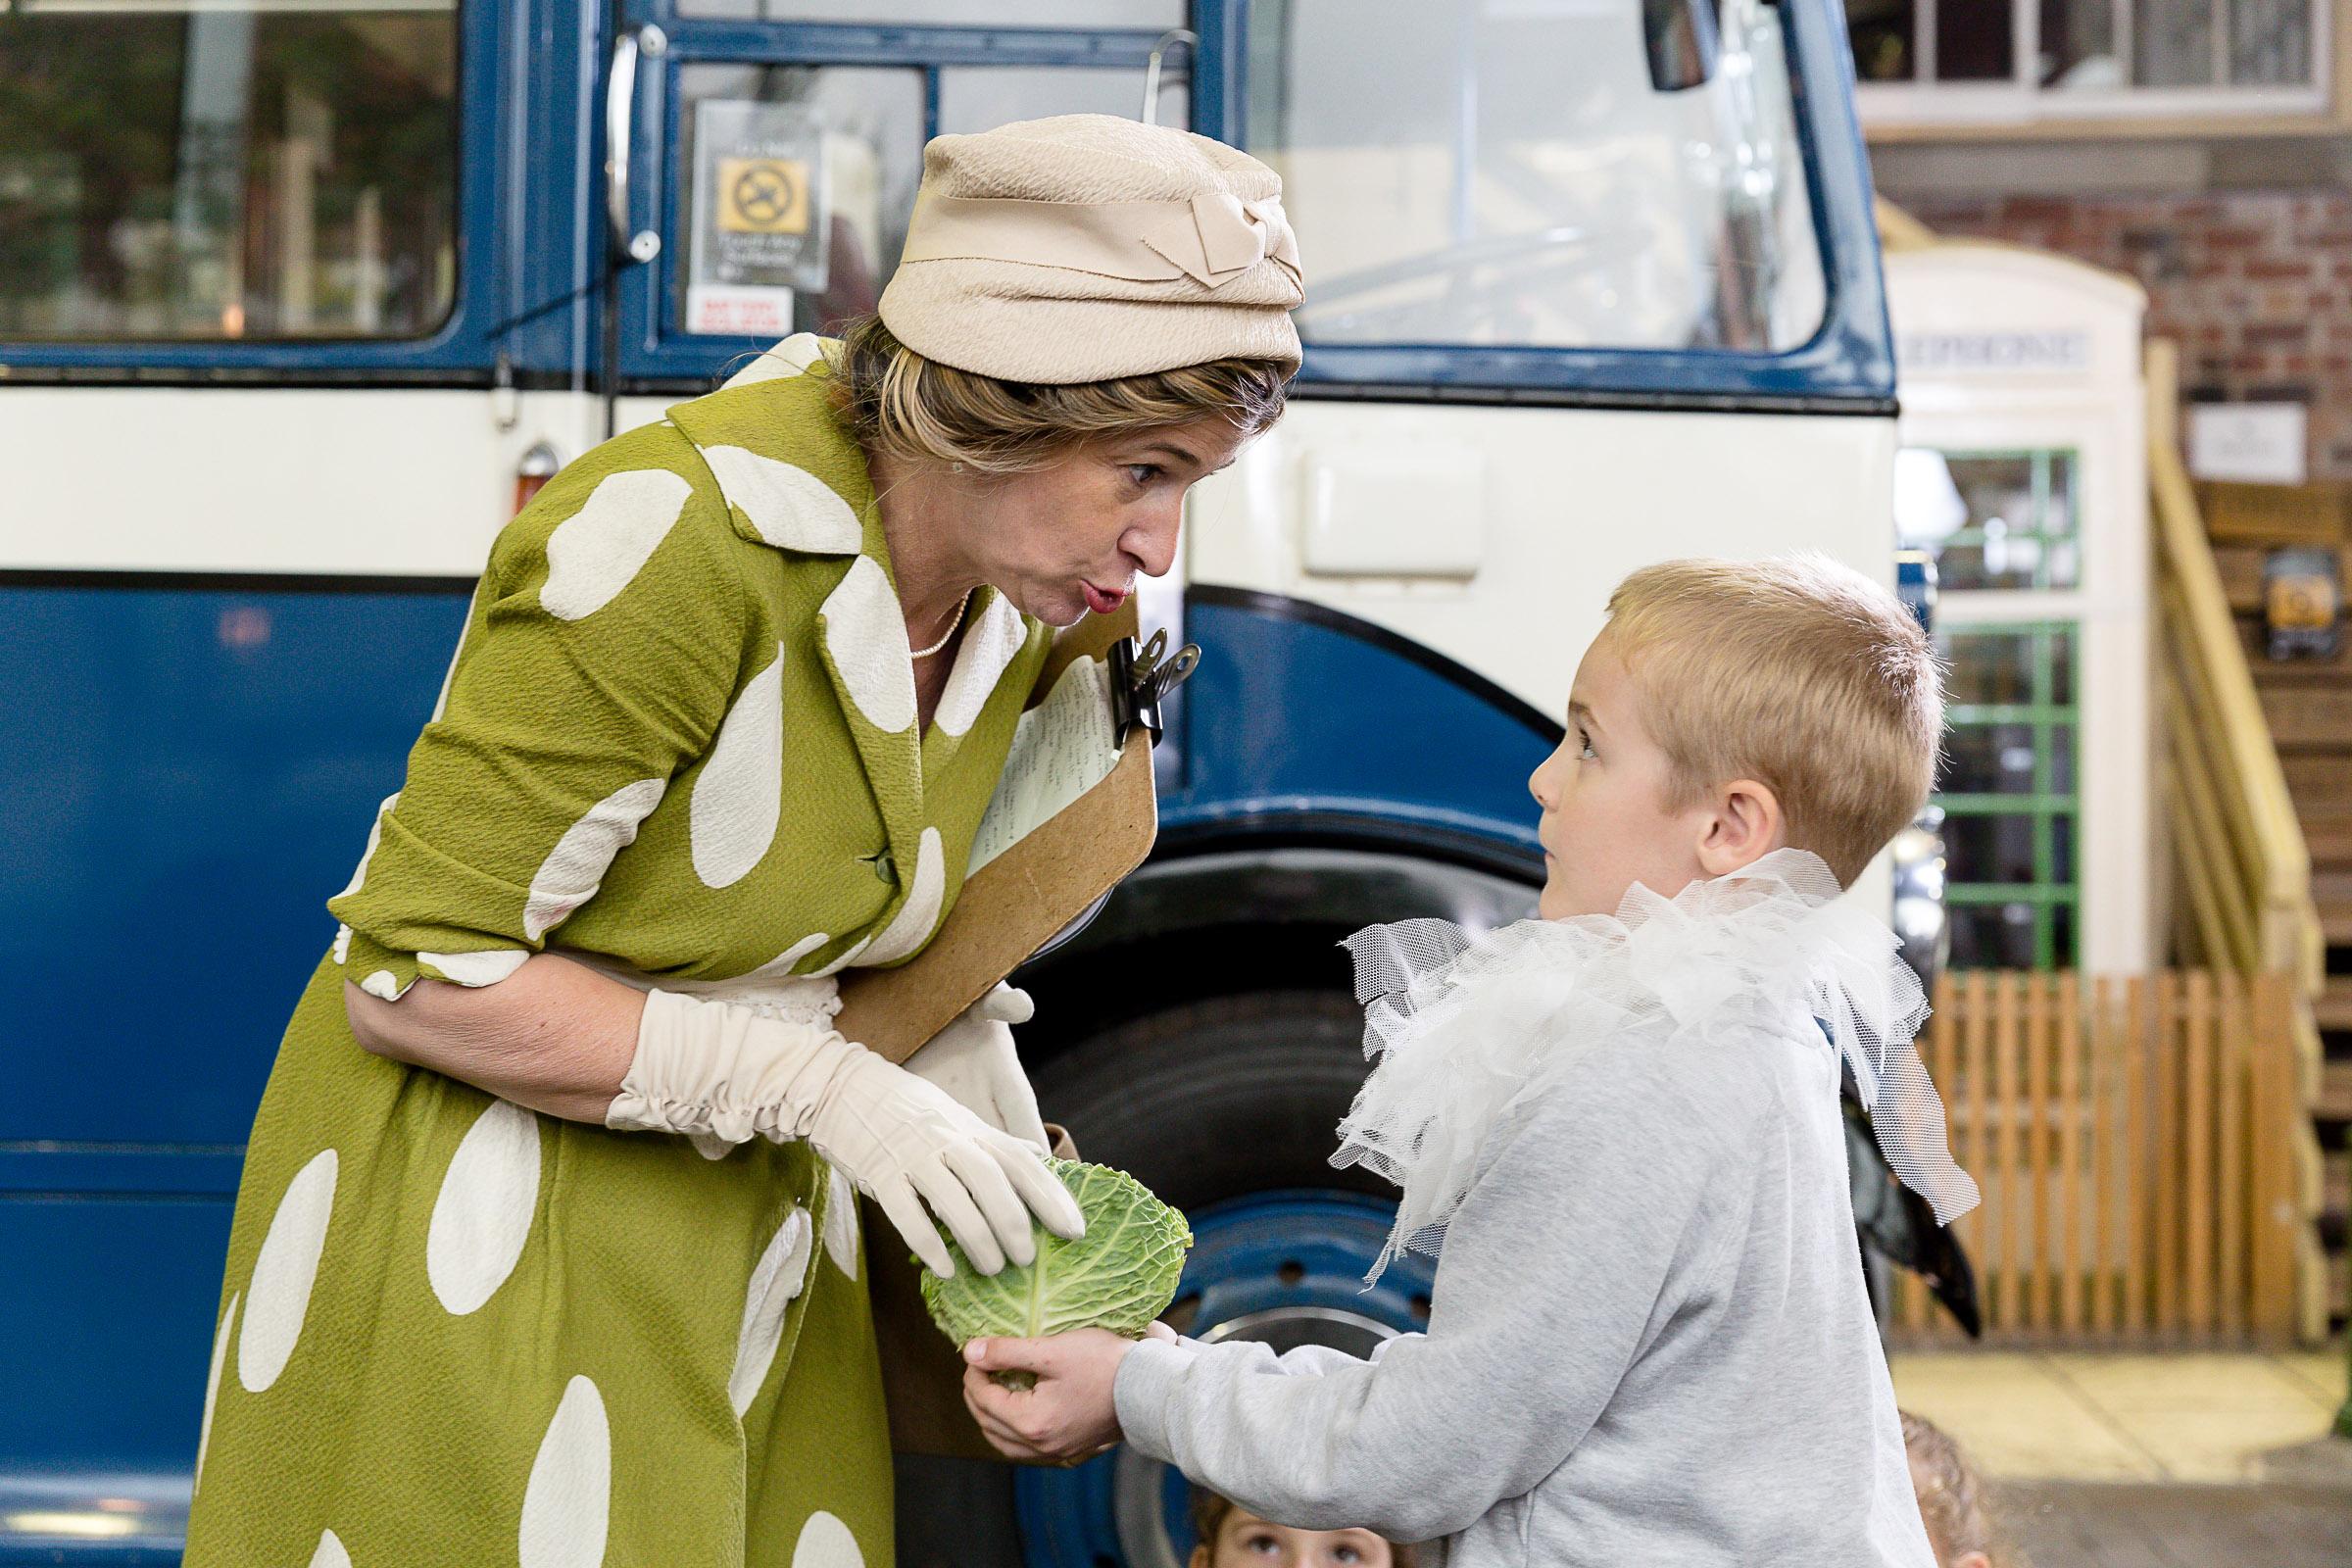 A woman and boy in 50s clothing